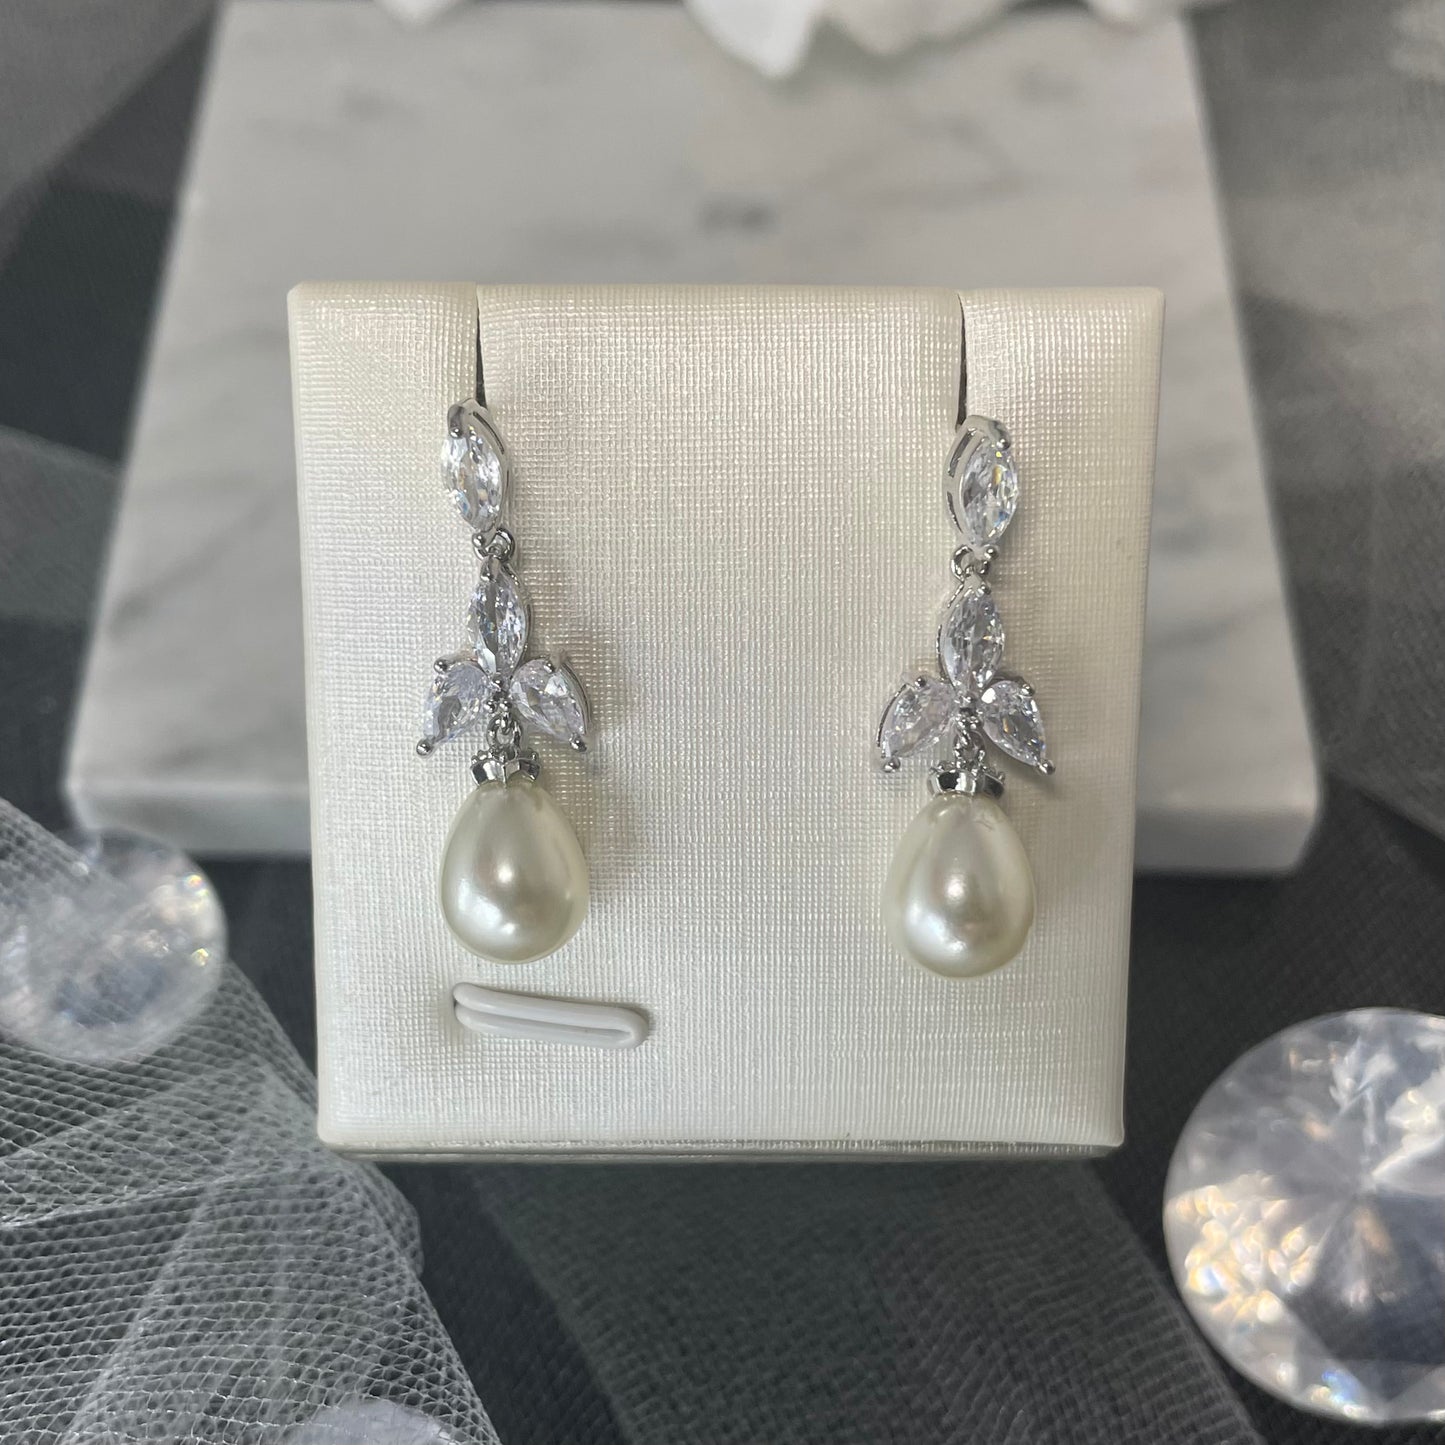 Ellet Bridal Earrings featuring CZ Stone Cluster and Freshwater Pearl Drop in Silver - Divine Bridal